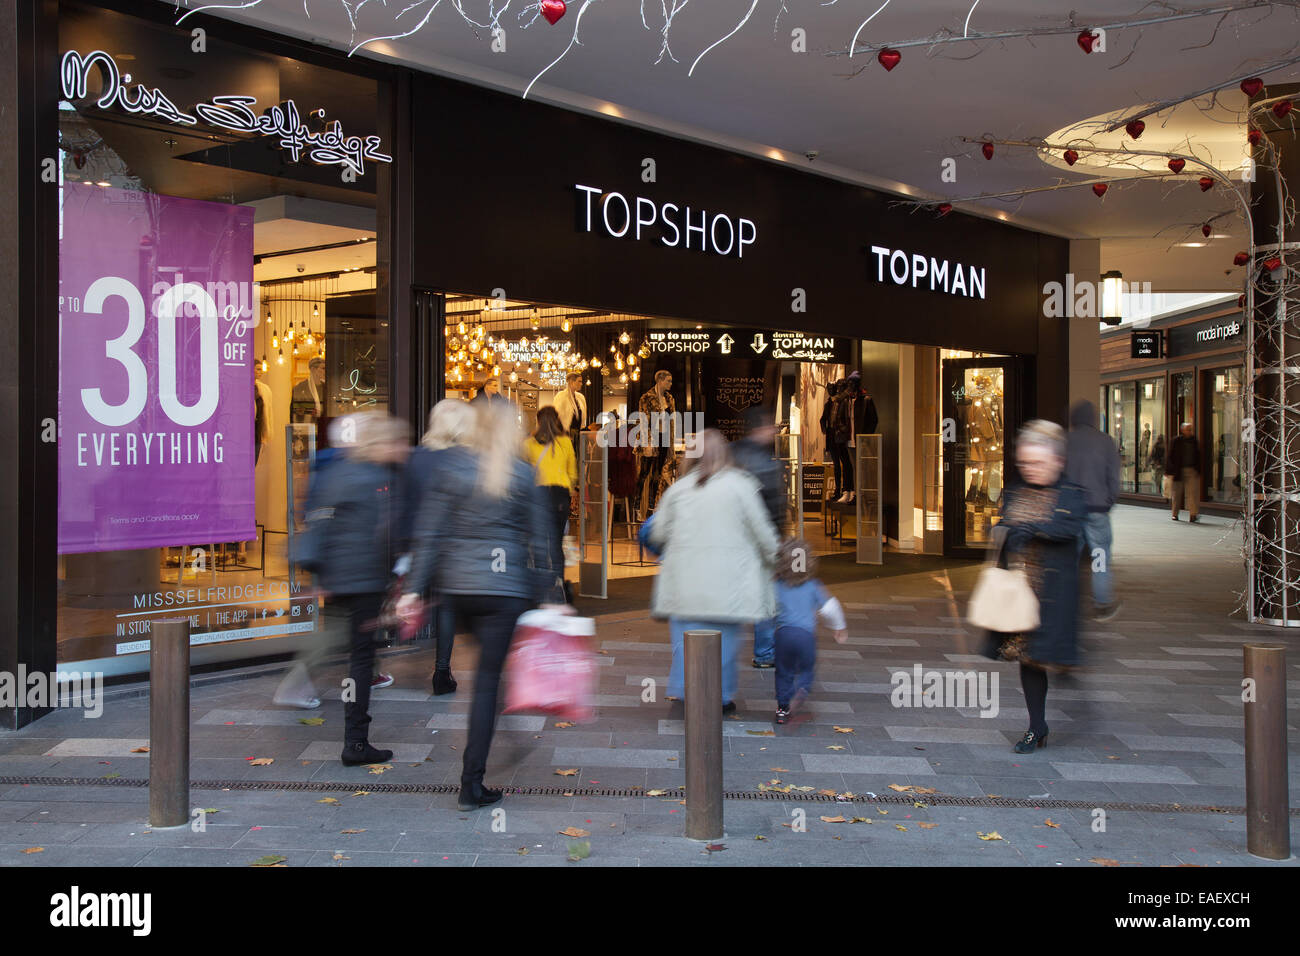 Up to 30% Thirty percent discounts on everything at TopShop & TopMan department store in Liverpool, Merseyside, UK. Liverpools business district. Stock Photo